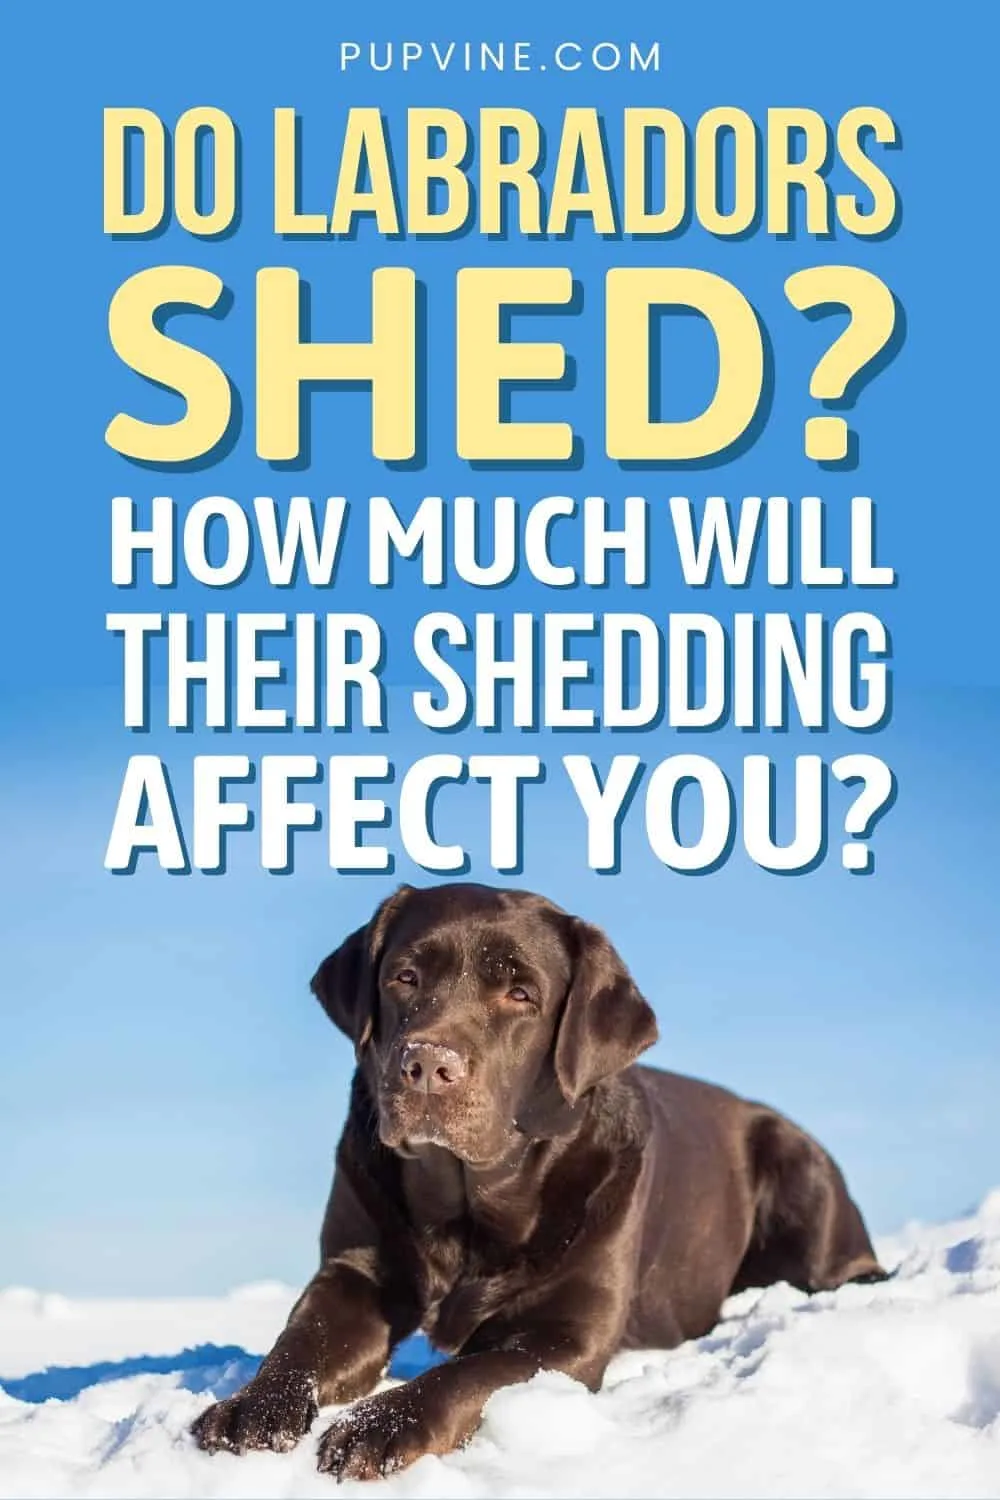 Do Labradors Shed How Much Will Their Shedding Affect You